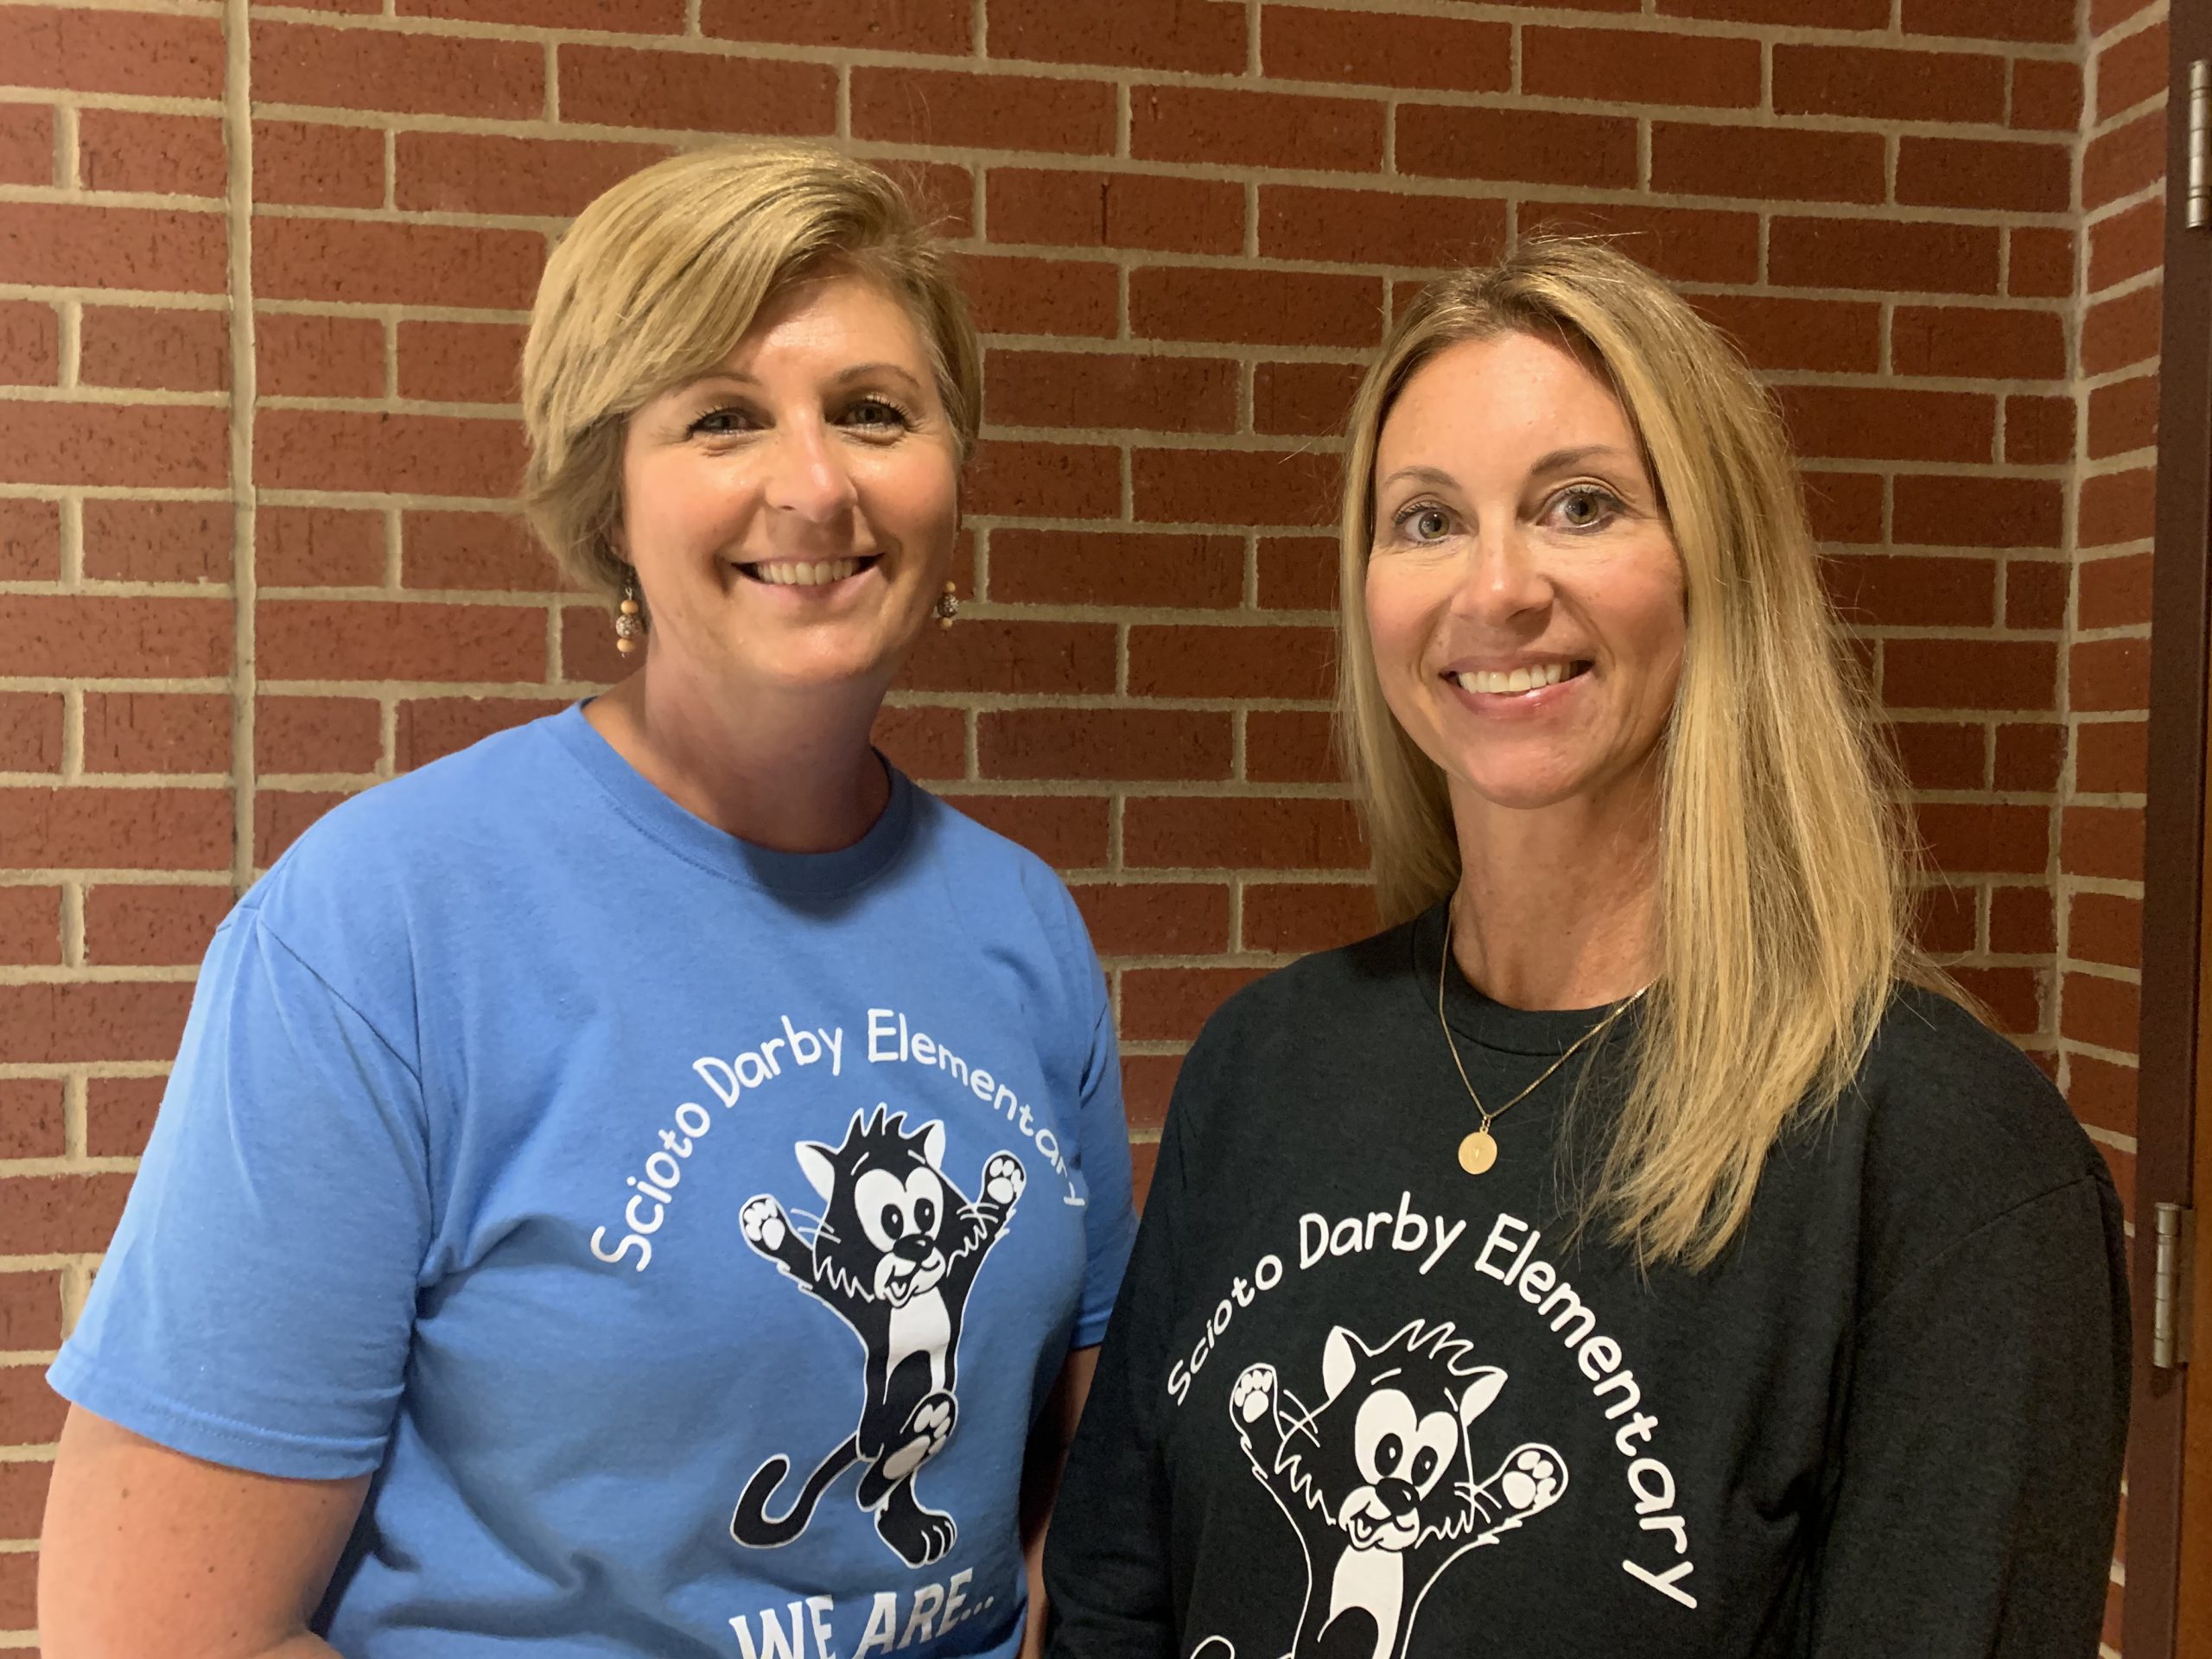 Two Scioto Darby Elementary Teachers Selected to be Ohio Teacher Leader Liaisons